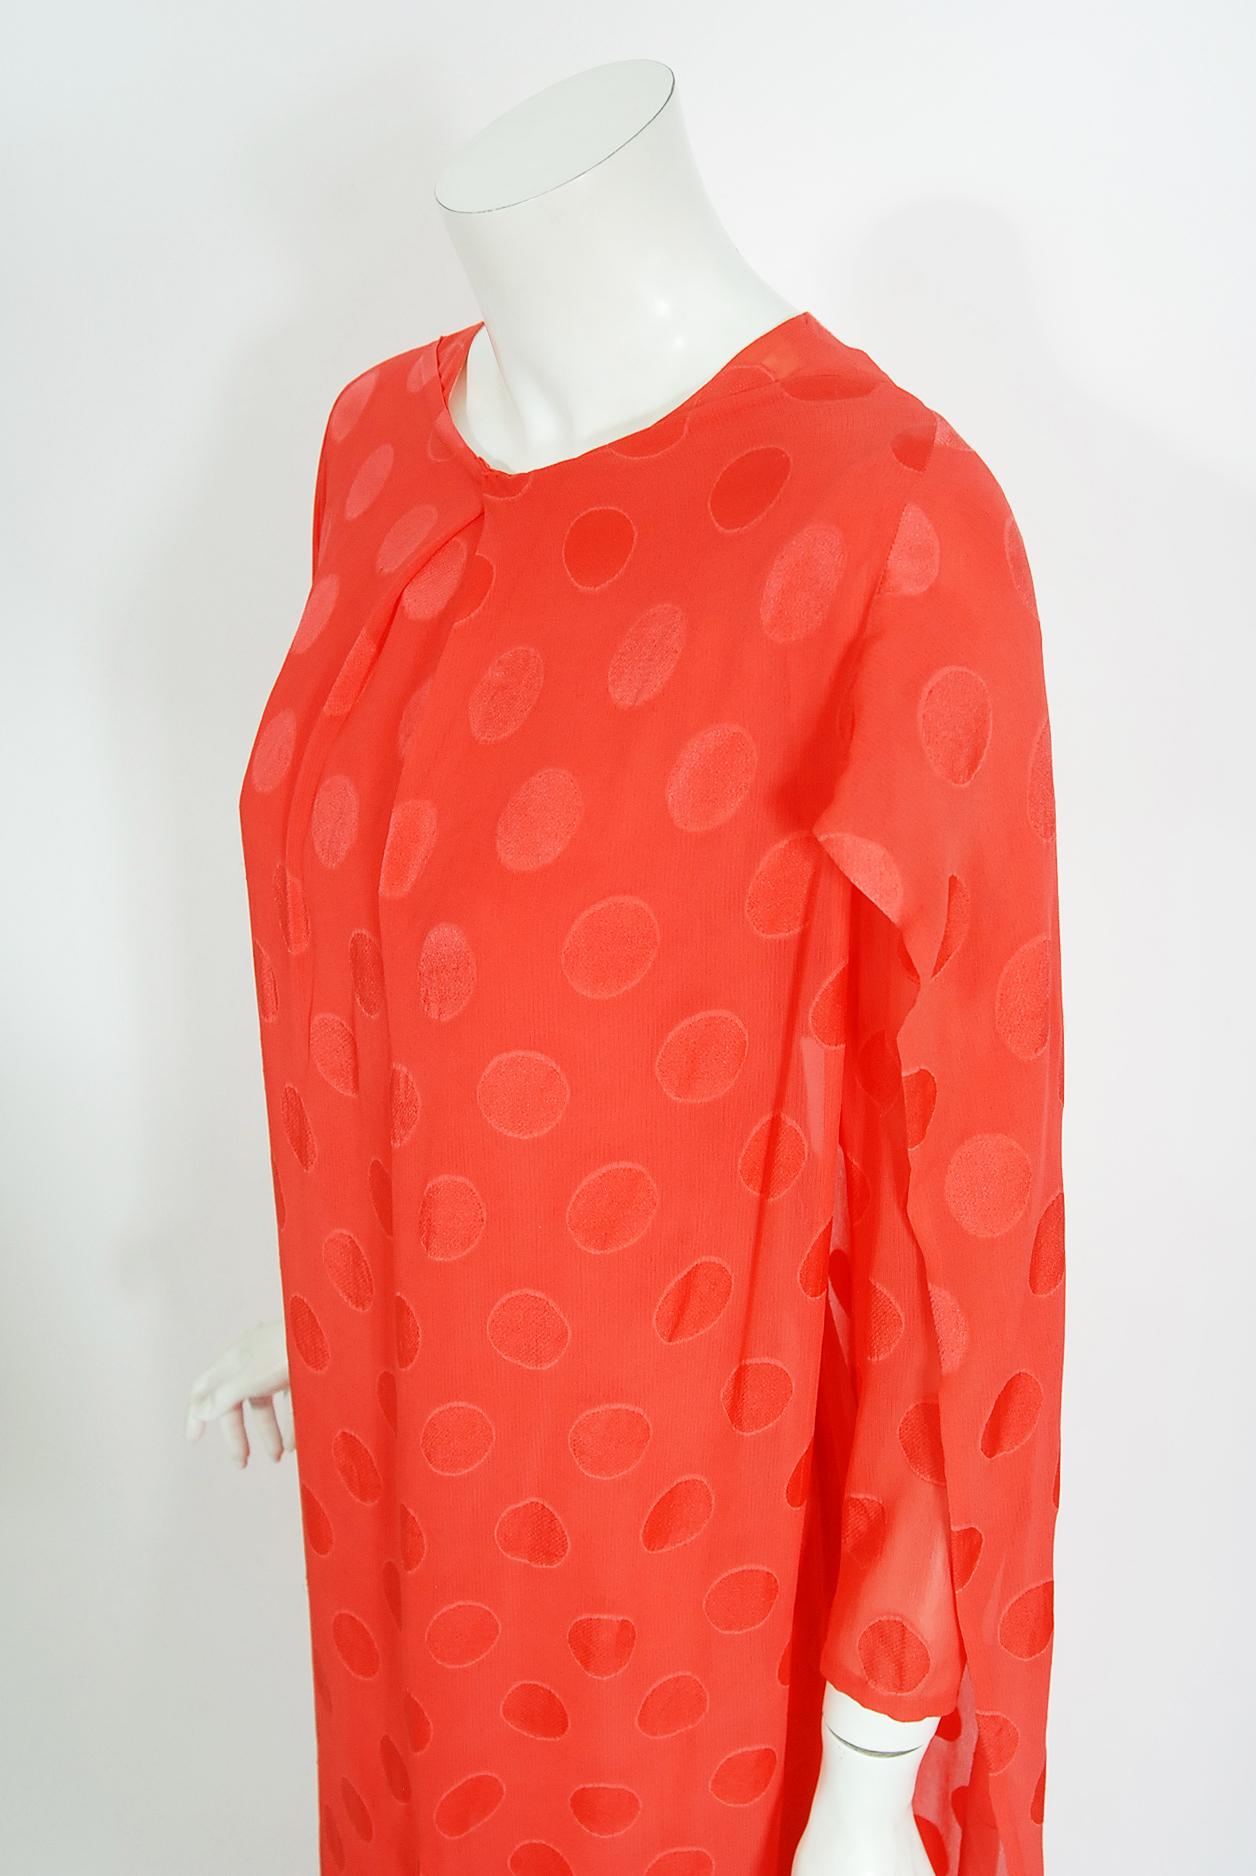 Vintage 1973 Givenchy Haute Couture Orange Dotted Silk Carwash-Hem Caftan Gown For Sale 2